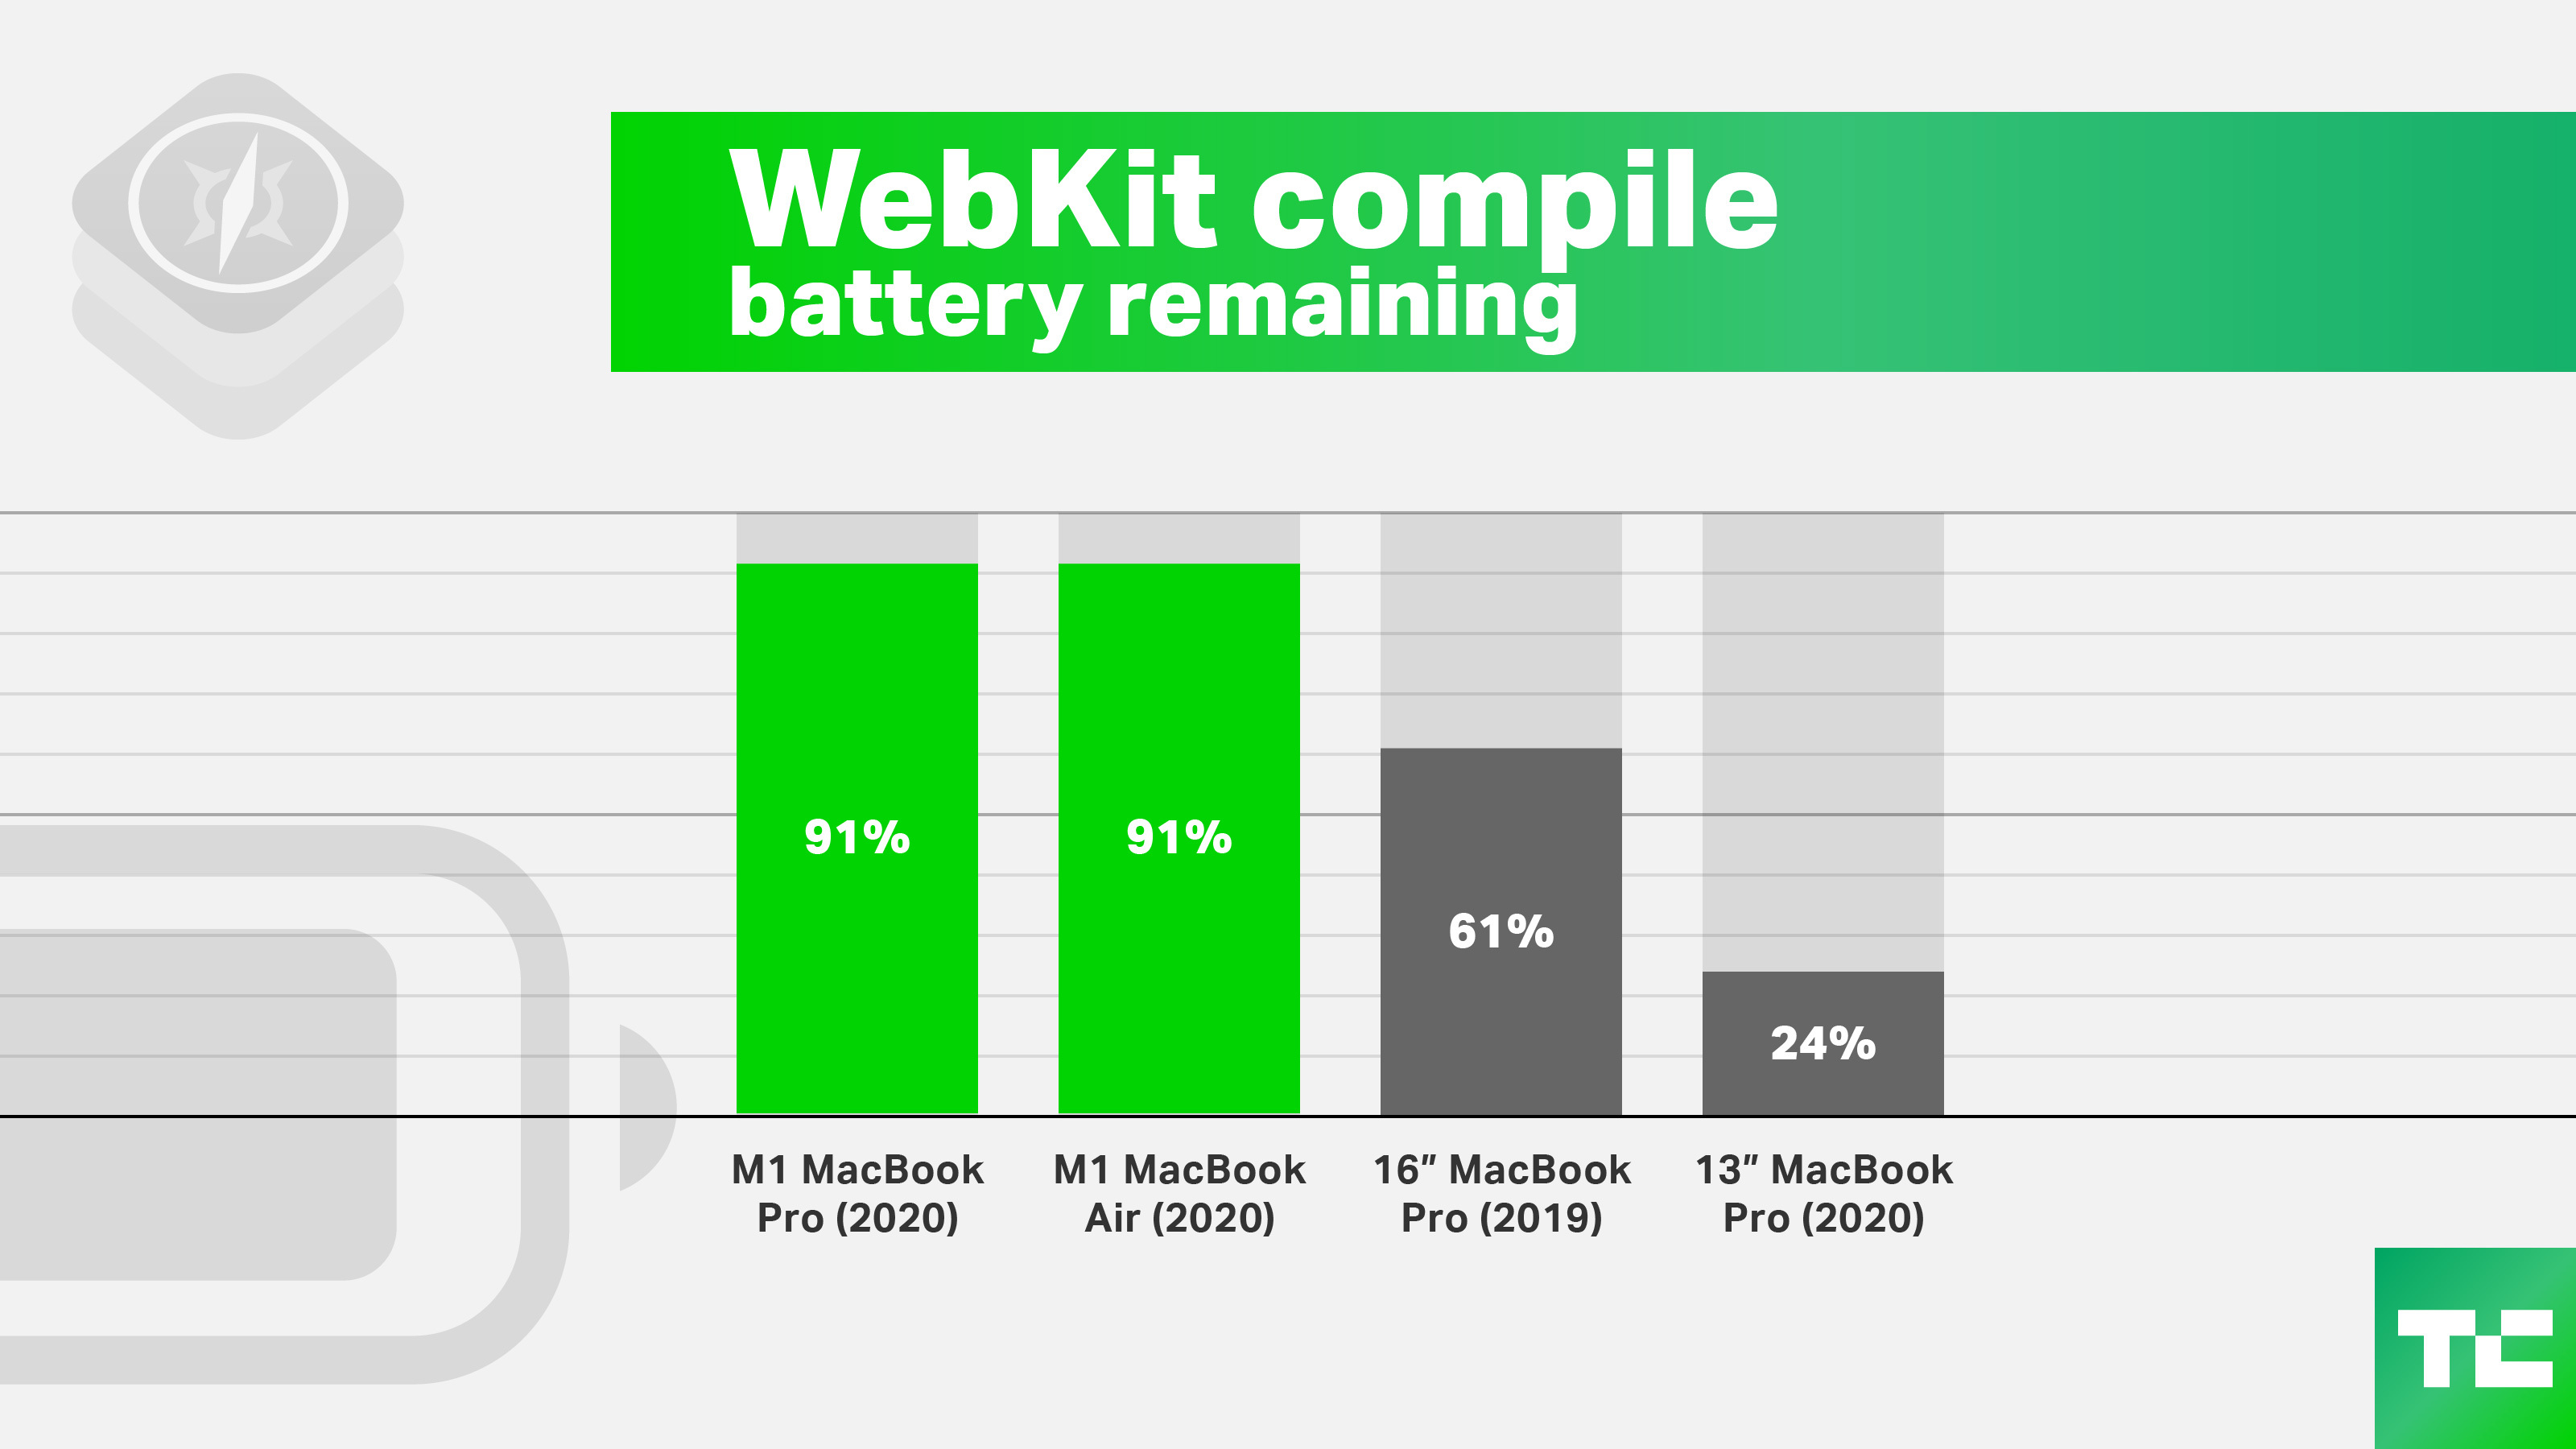 Yeah, Apple’s M1 MacBook Pro is powerful, but it’s the battery life